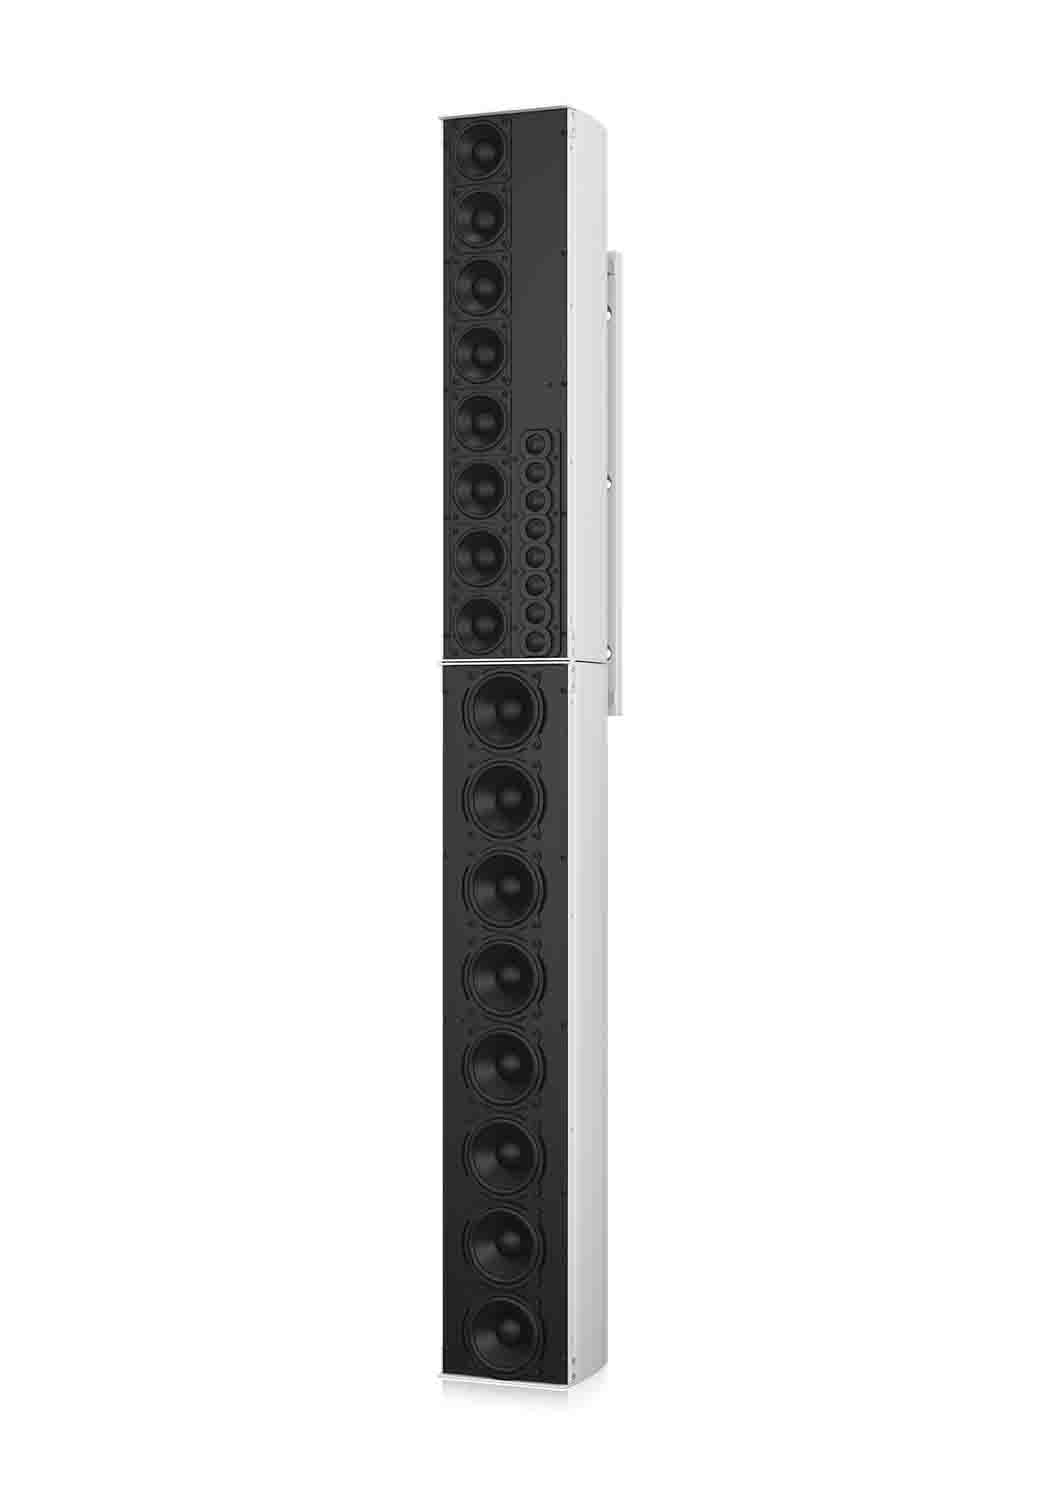 Tannoy QFLEX 24, Digitally Steerable Powered Column Array Loudspeaker with 24 Independently Controlled Drivers - Hollywood DJ